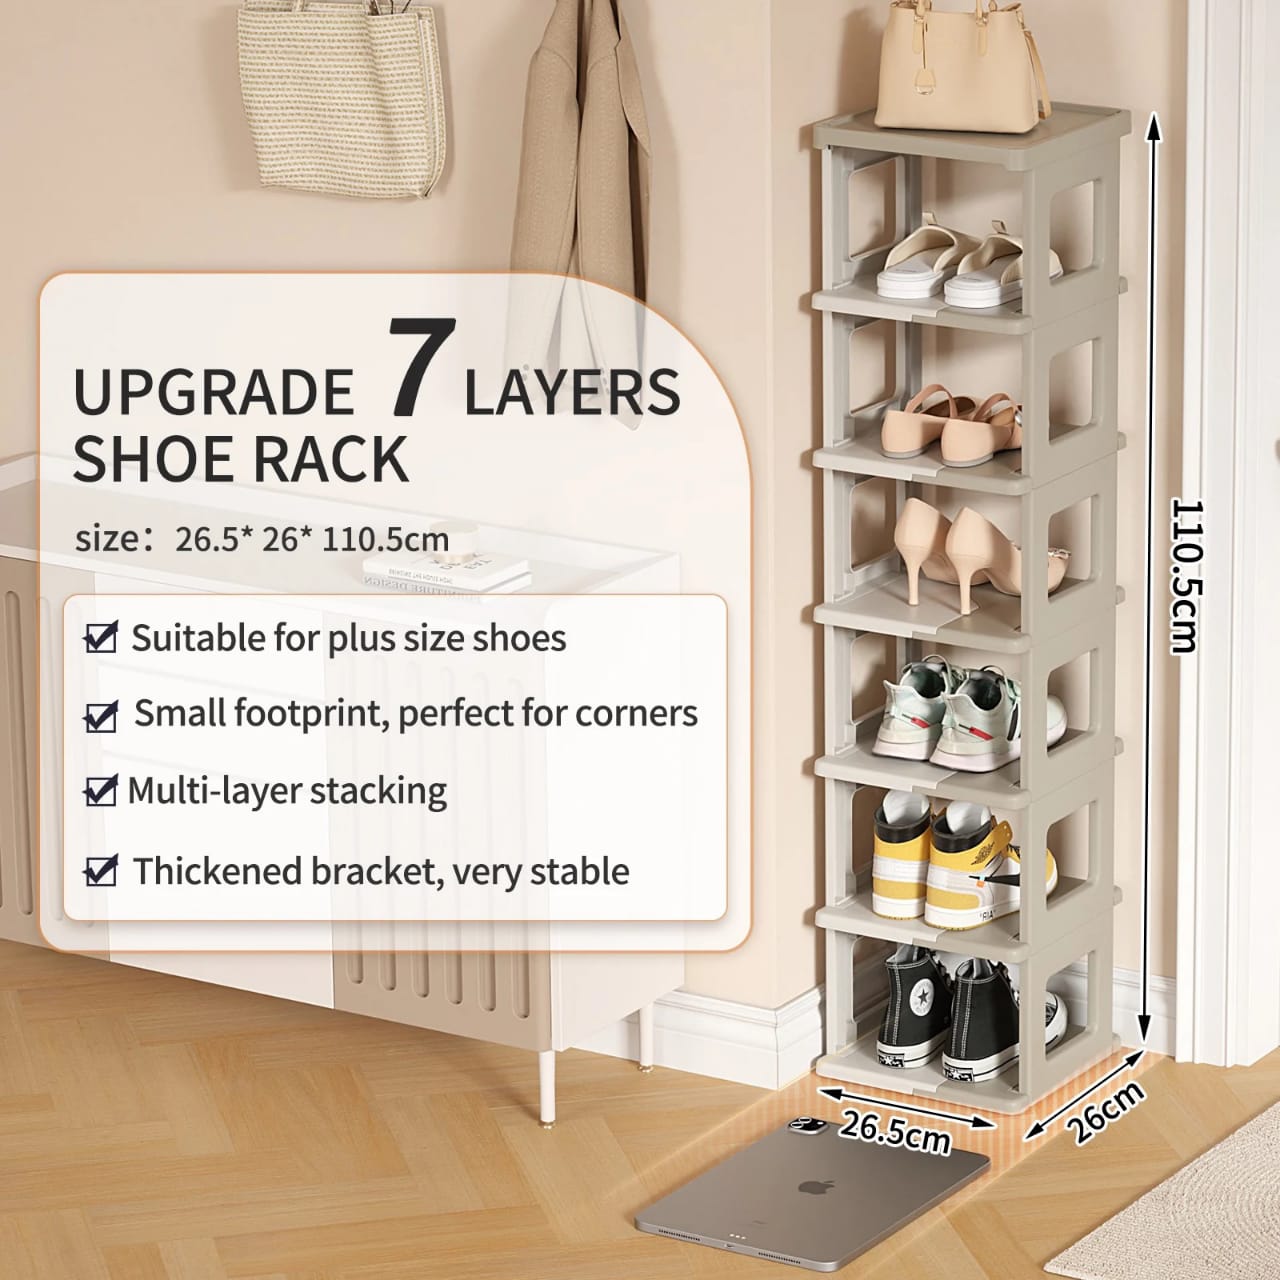 Shoes and Bags are Arranged on a Multi-layer Foldable Shoe Rack Shelf.